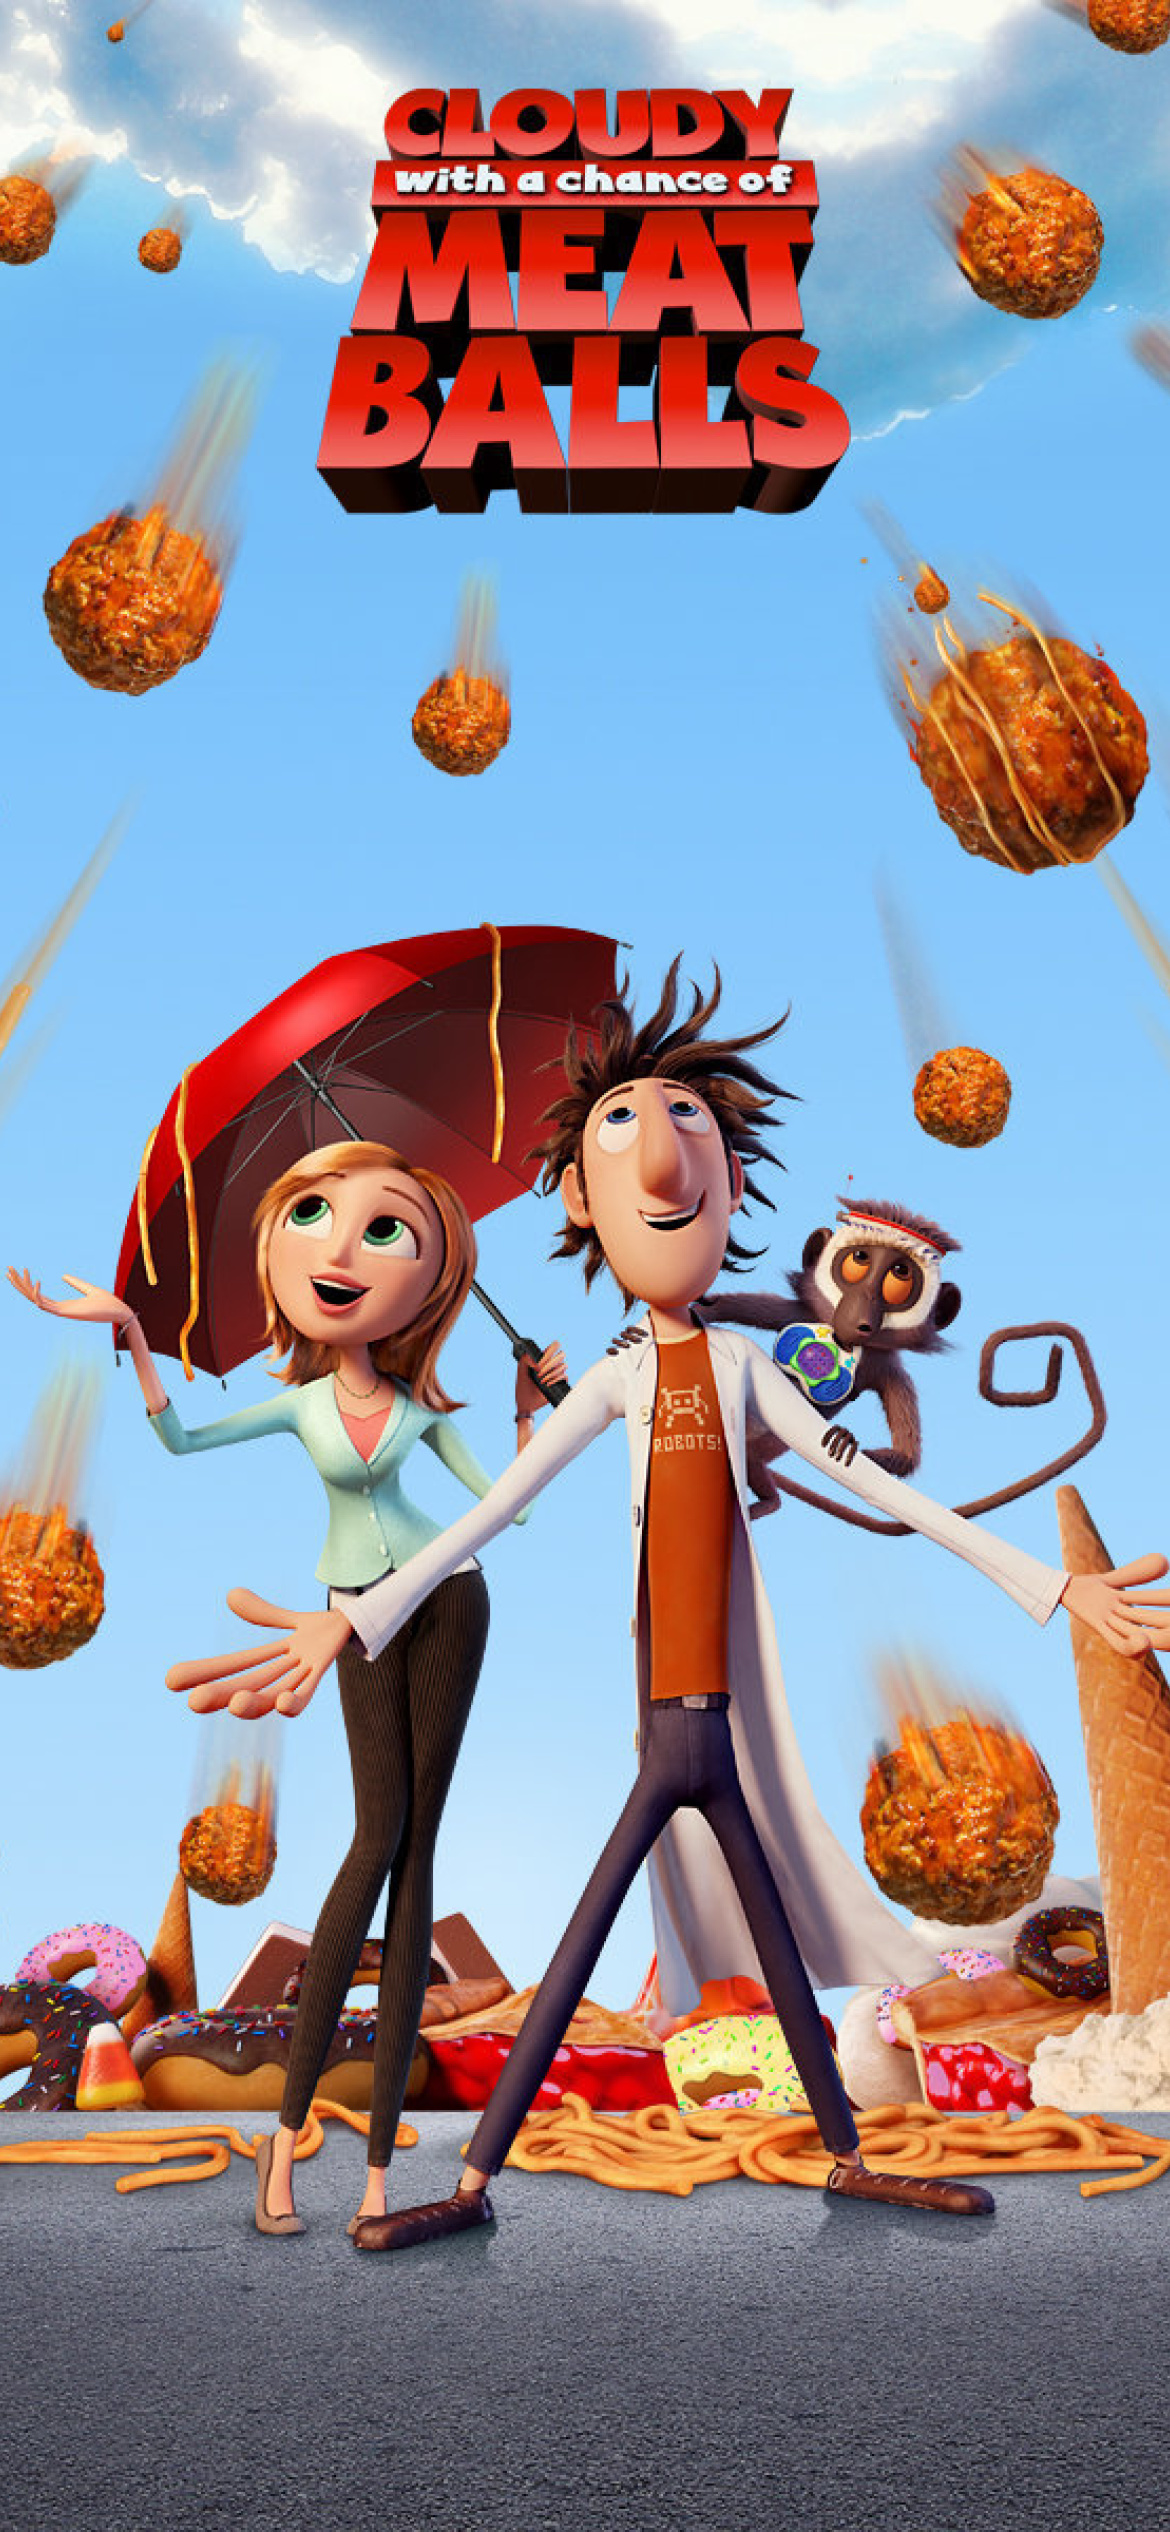 Das Cloudy with a Chance of Meatballs Wallpaper 1170x2532